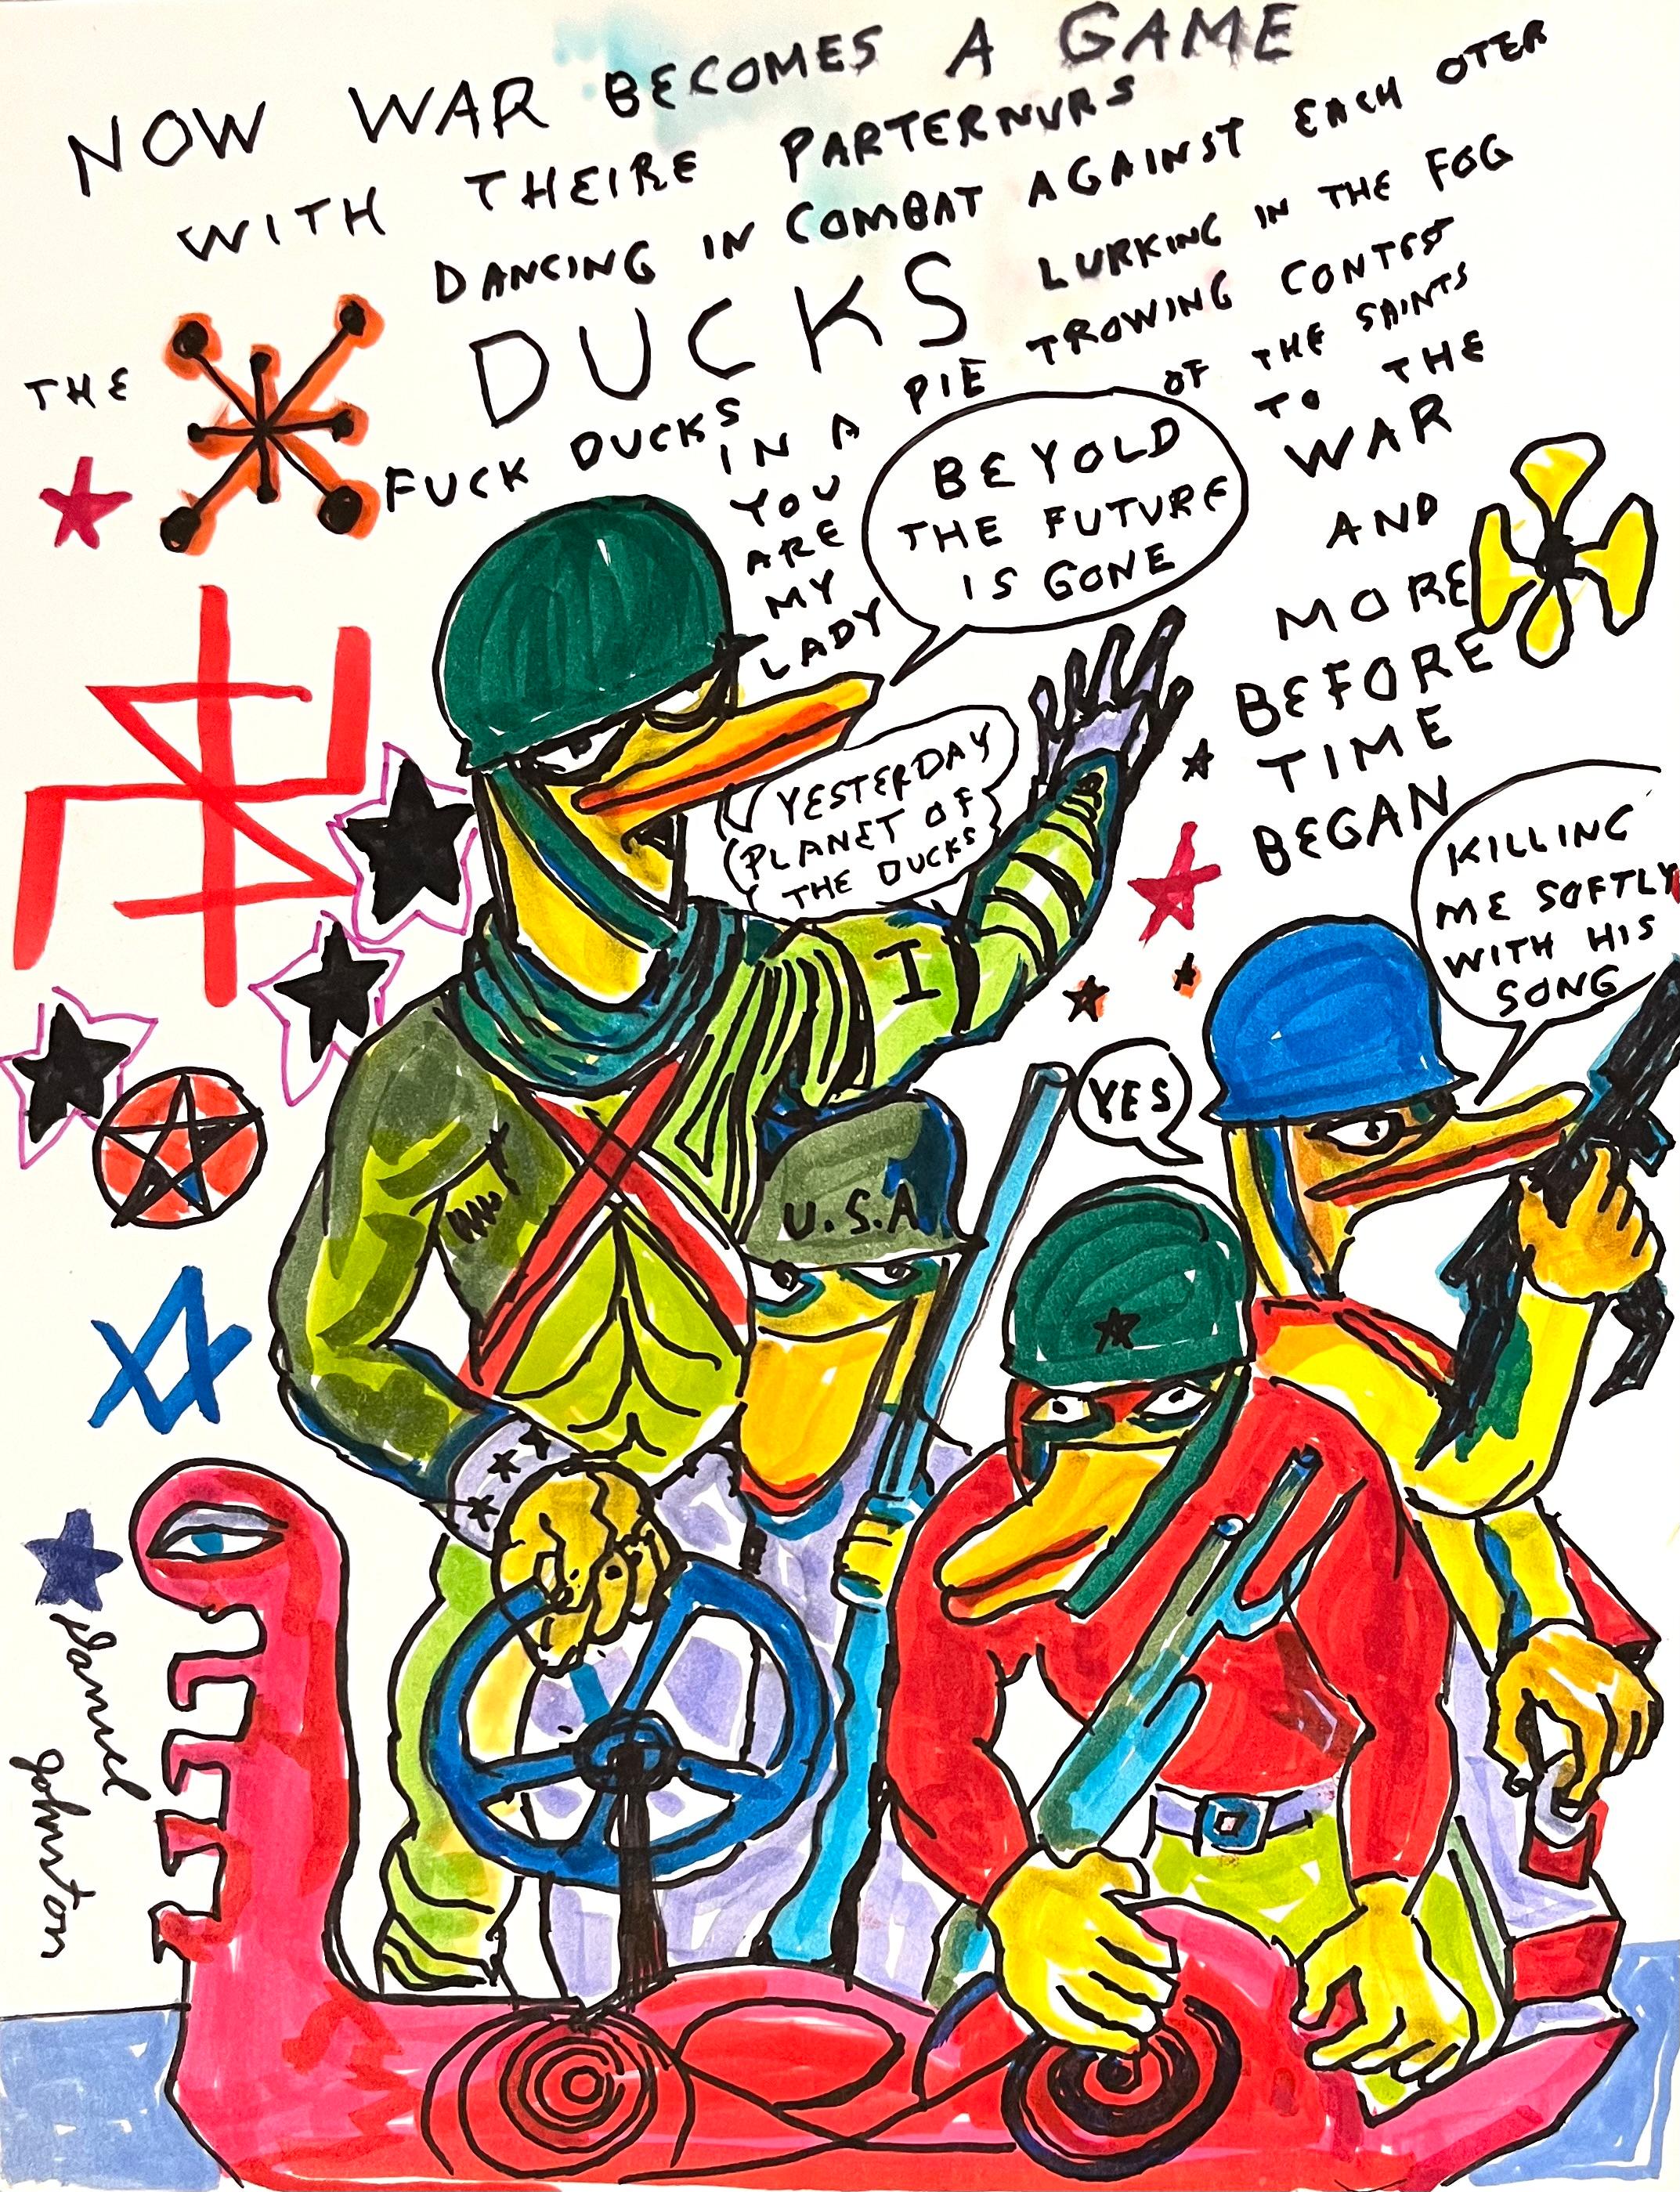 Daniel Johnston Figurative Art - Now War Becomes A Game - Figure Ink Drawing on Paper, Outsider Art, Duck Wars